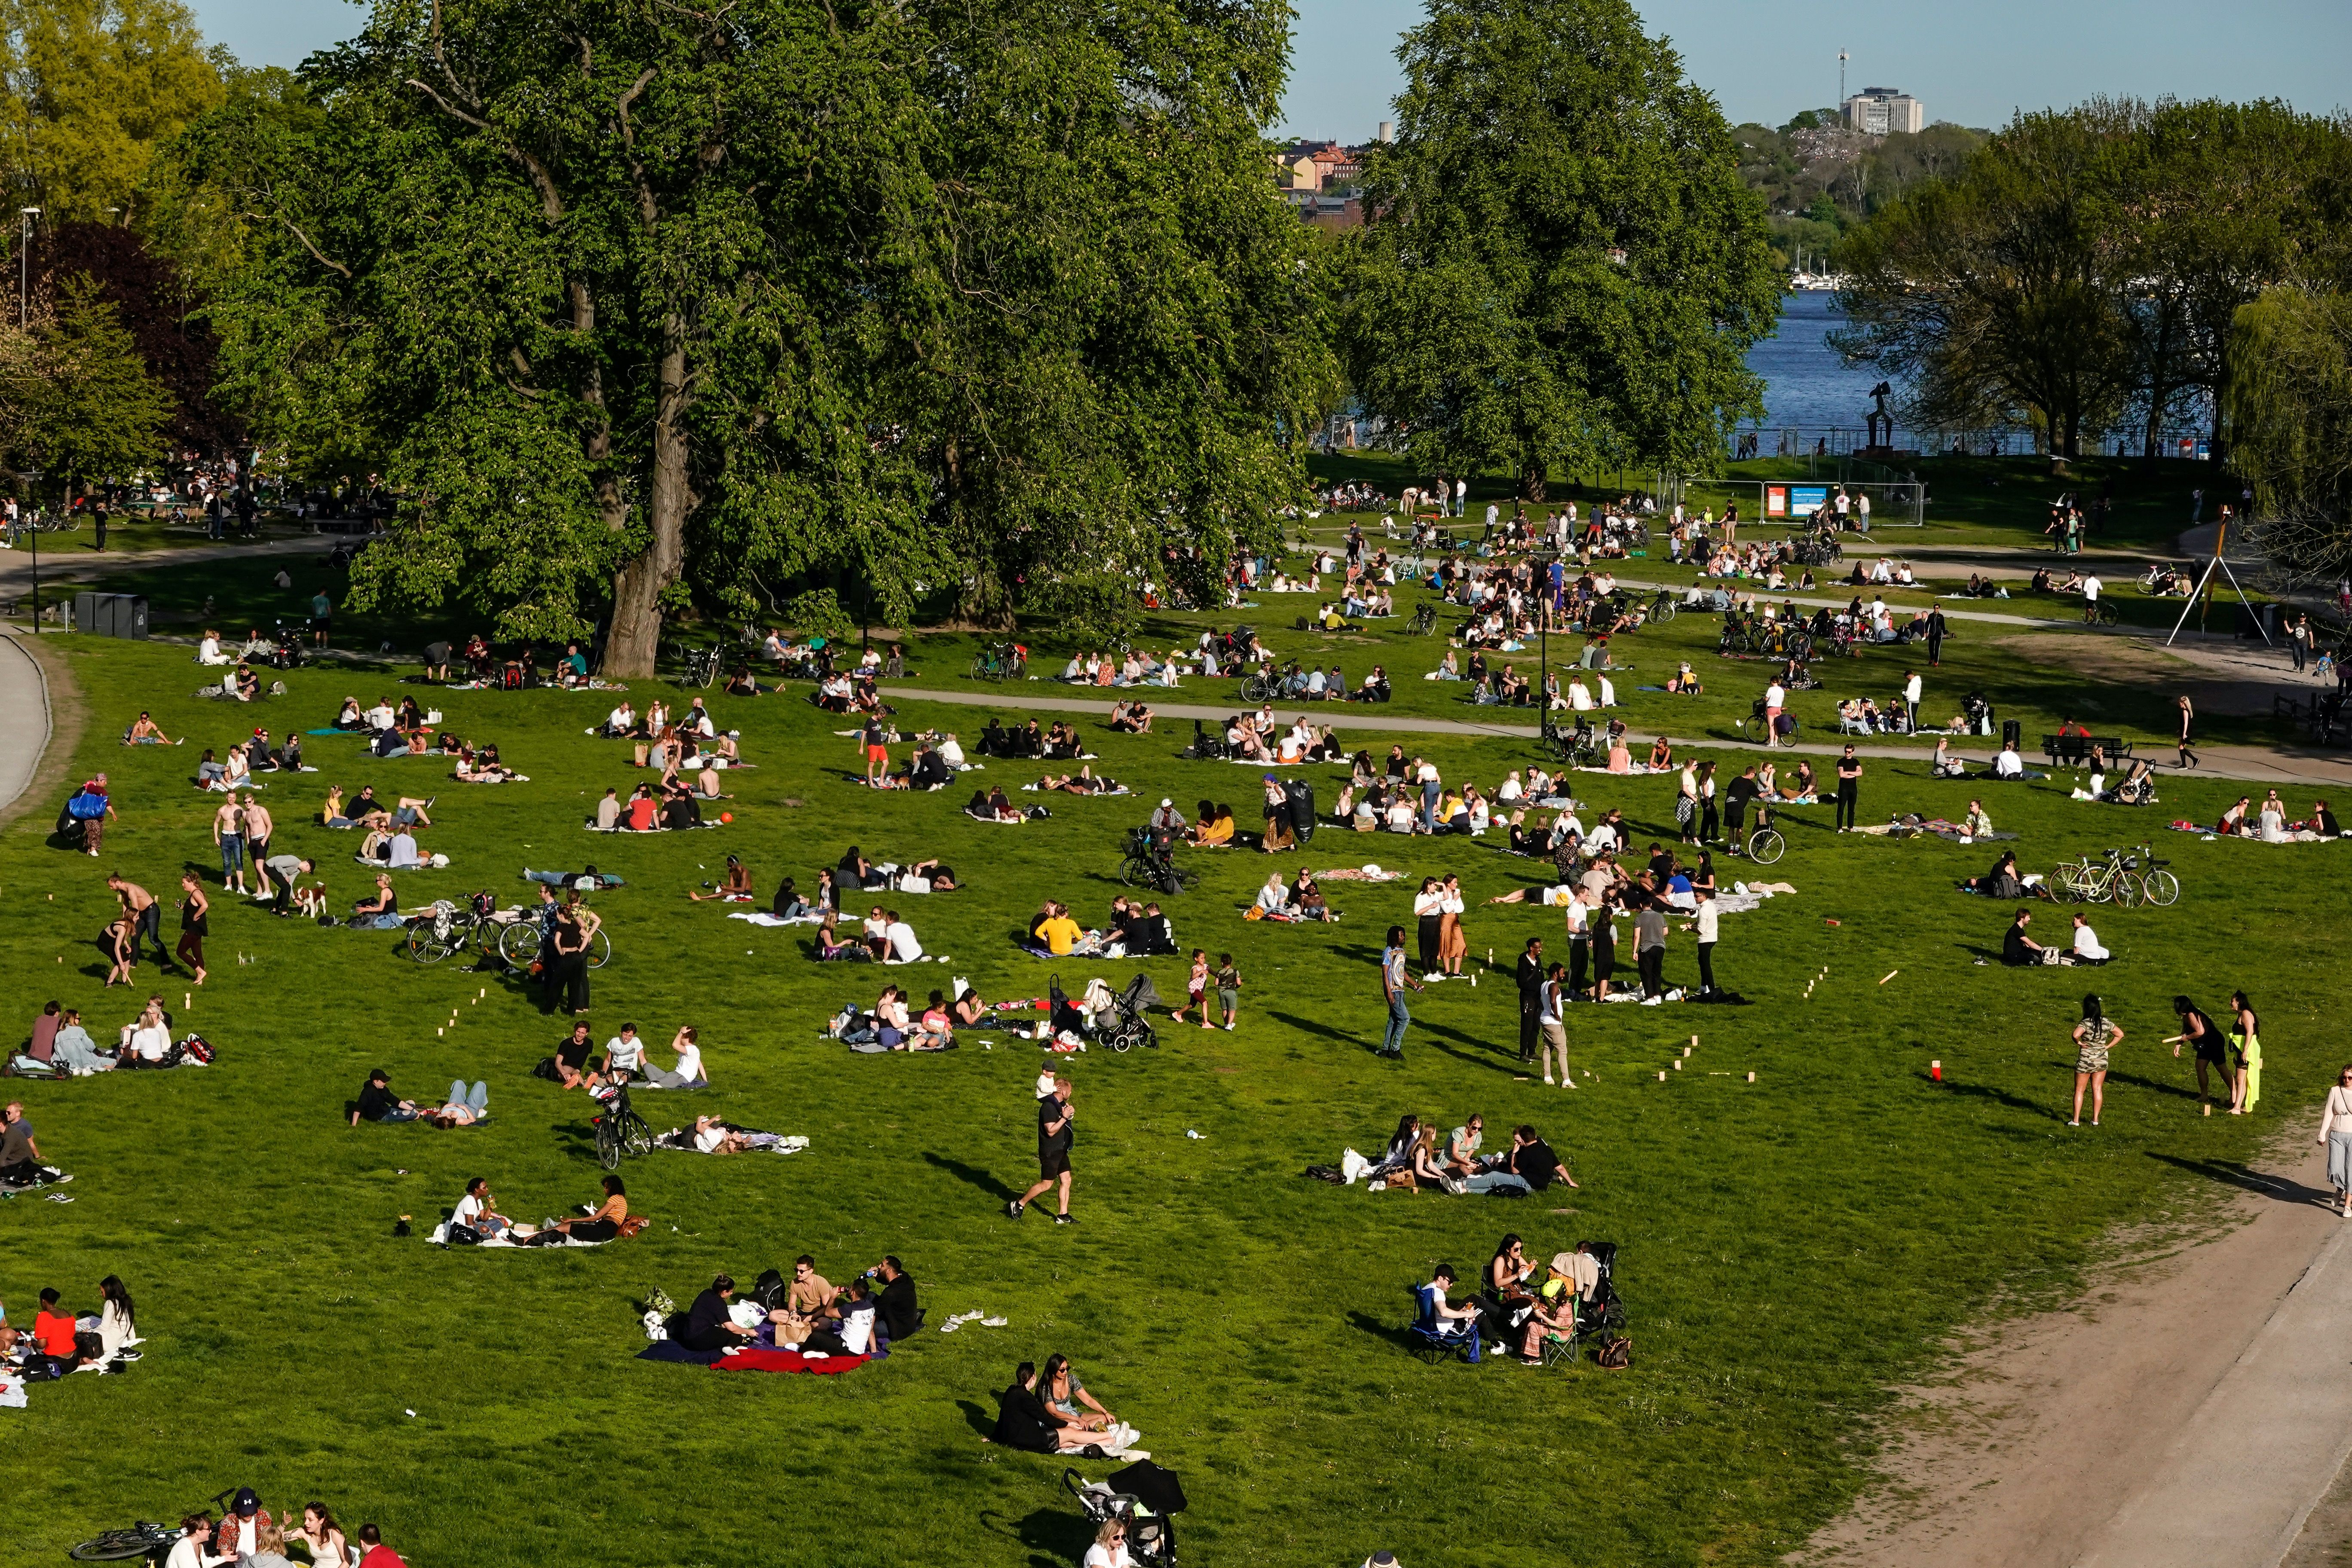 People in Stockholm's Ralambshovspark on a summer day during the coronavirus pandemic. Image by Alexanderstock23 / Shutterstock. Sweden, 2020.